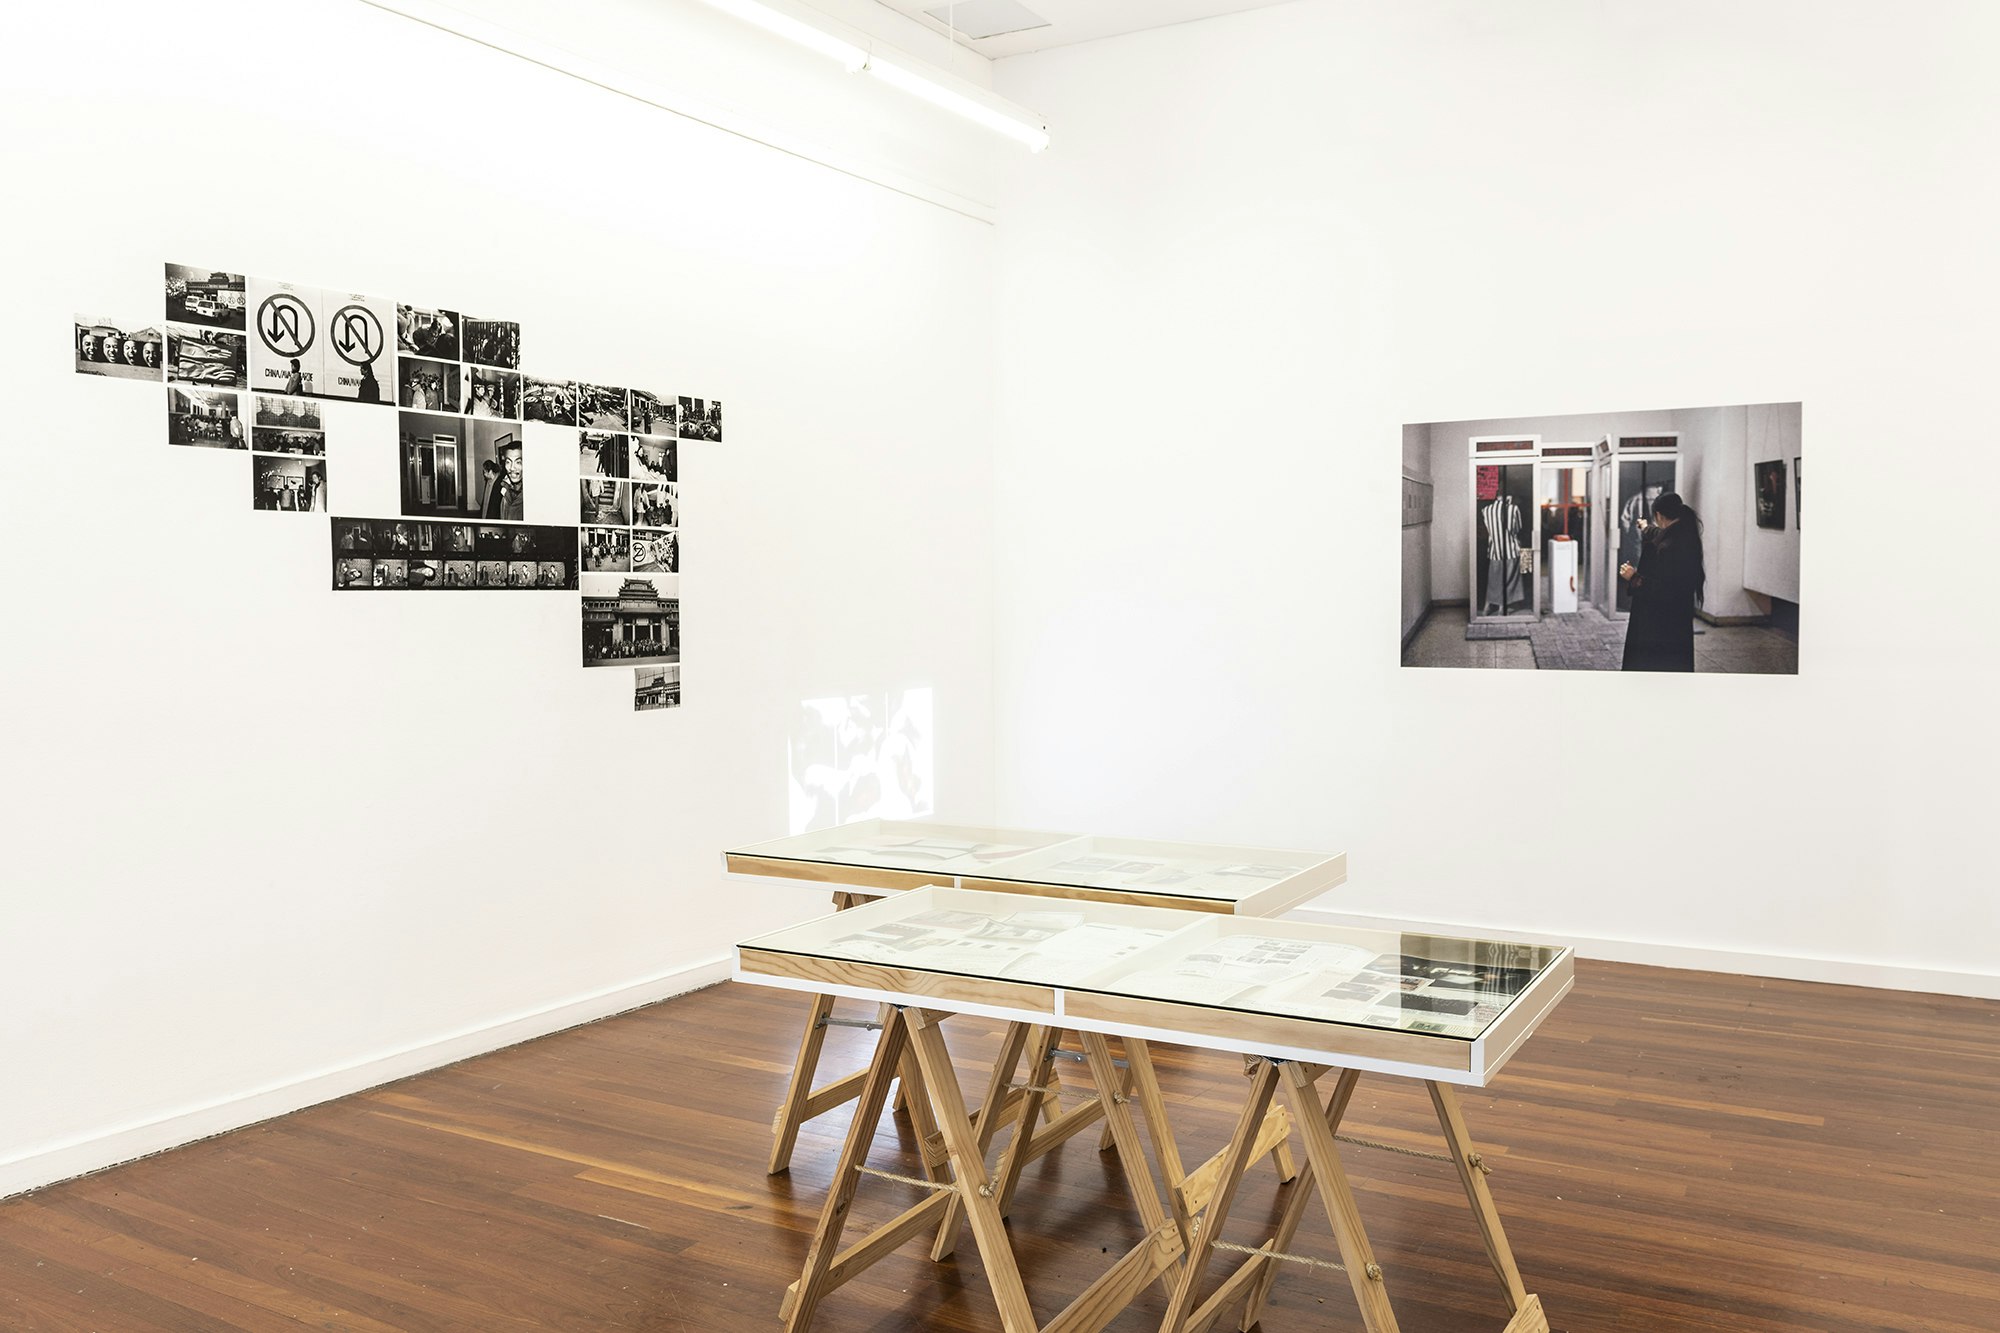 A white gallery space with two glass display cabinets, a projector stacked on concrete blocks facing a wall and a selection of black inkjet photographs pasted up on the wall